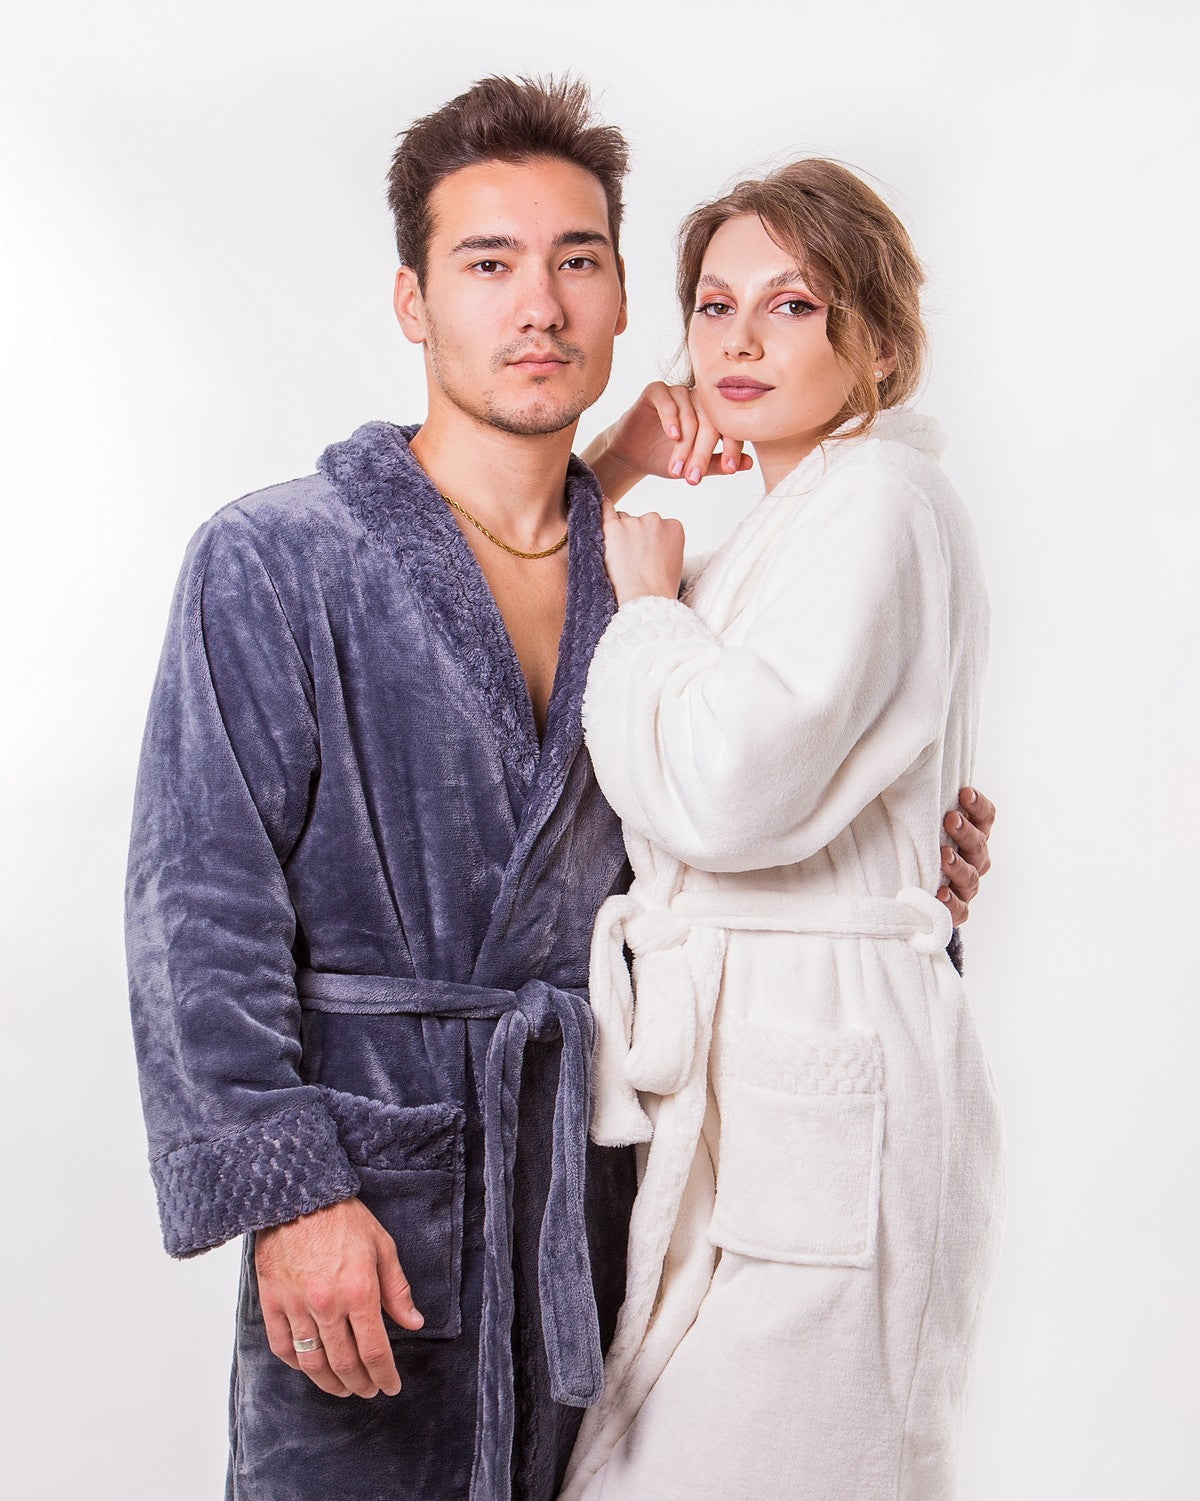 Customized Long Bathrobes King and Queen for Couple Style 2 